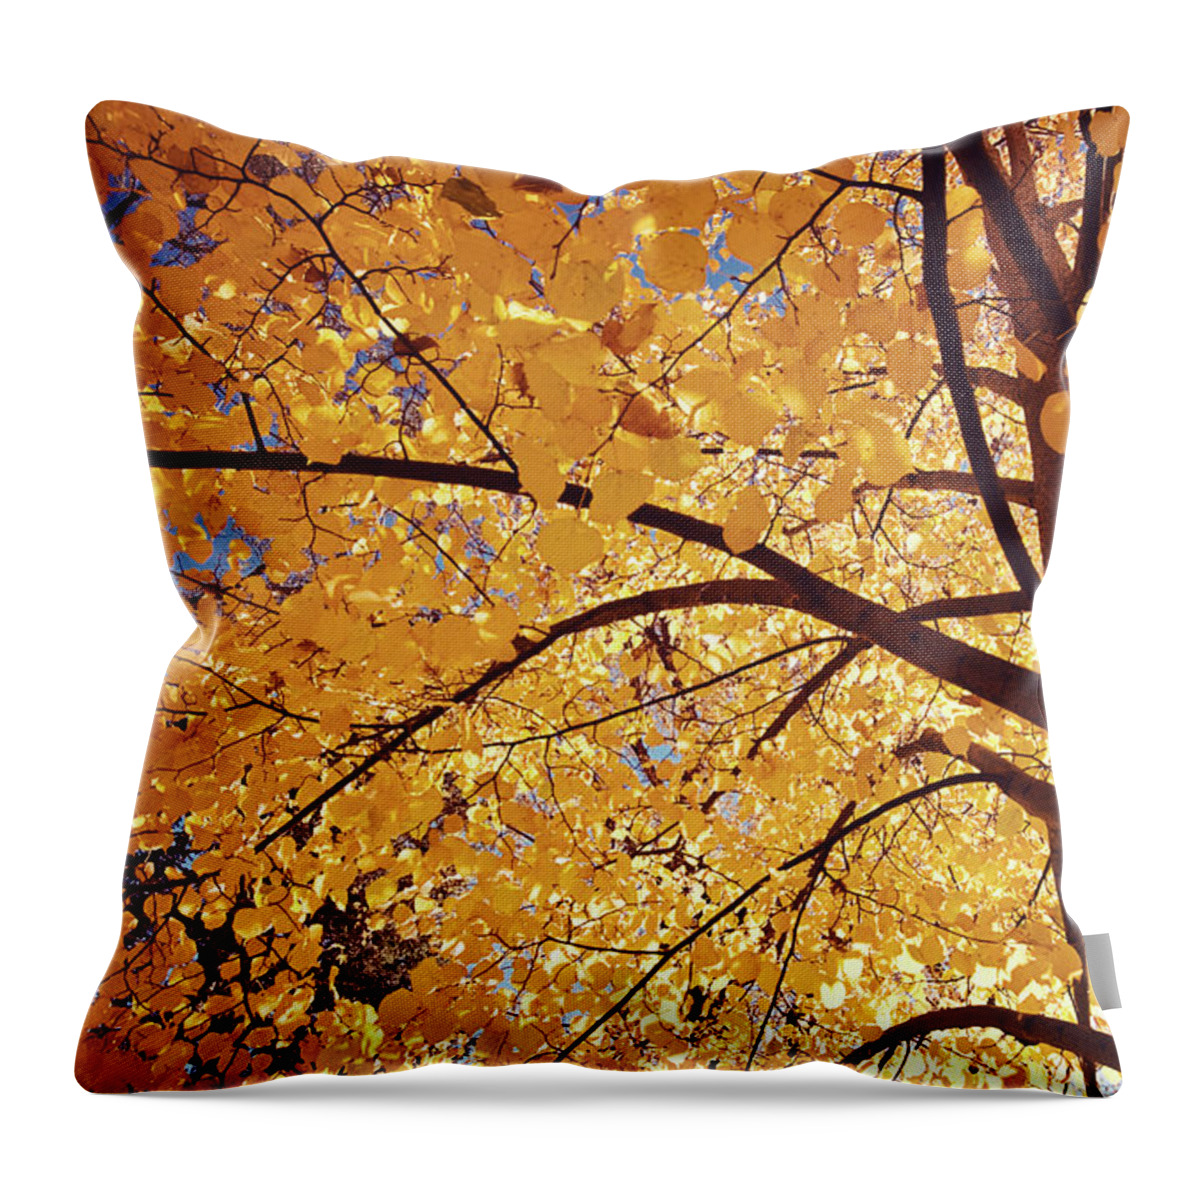 Shadow Throw Pillow featuring the photograph Autumn Leaves by Ivanastar